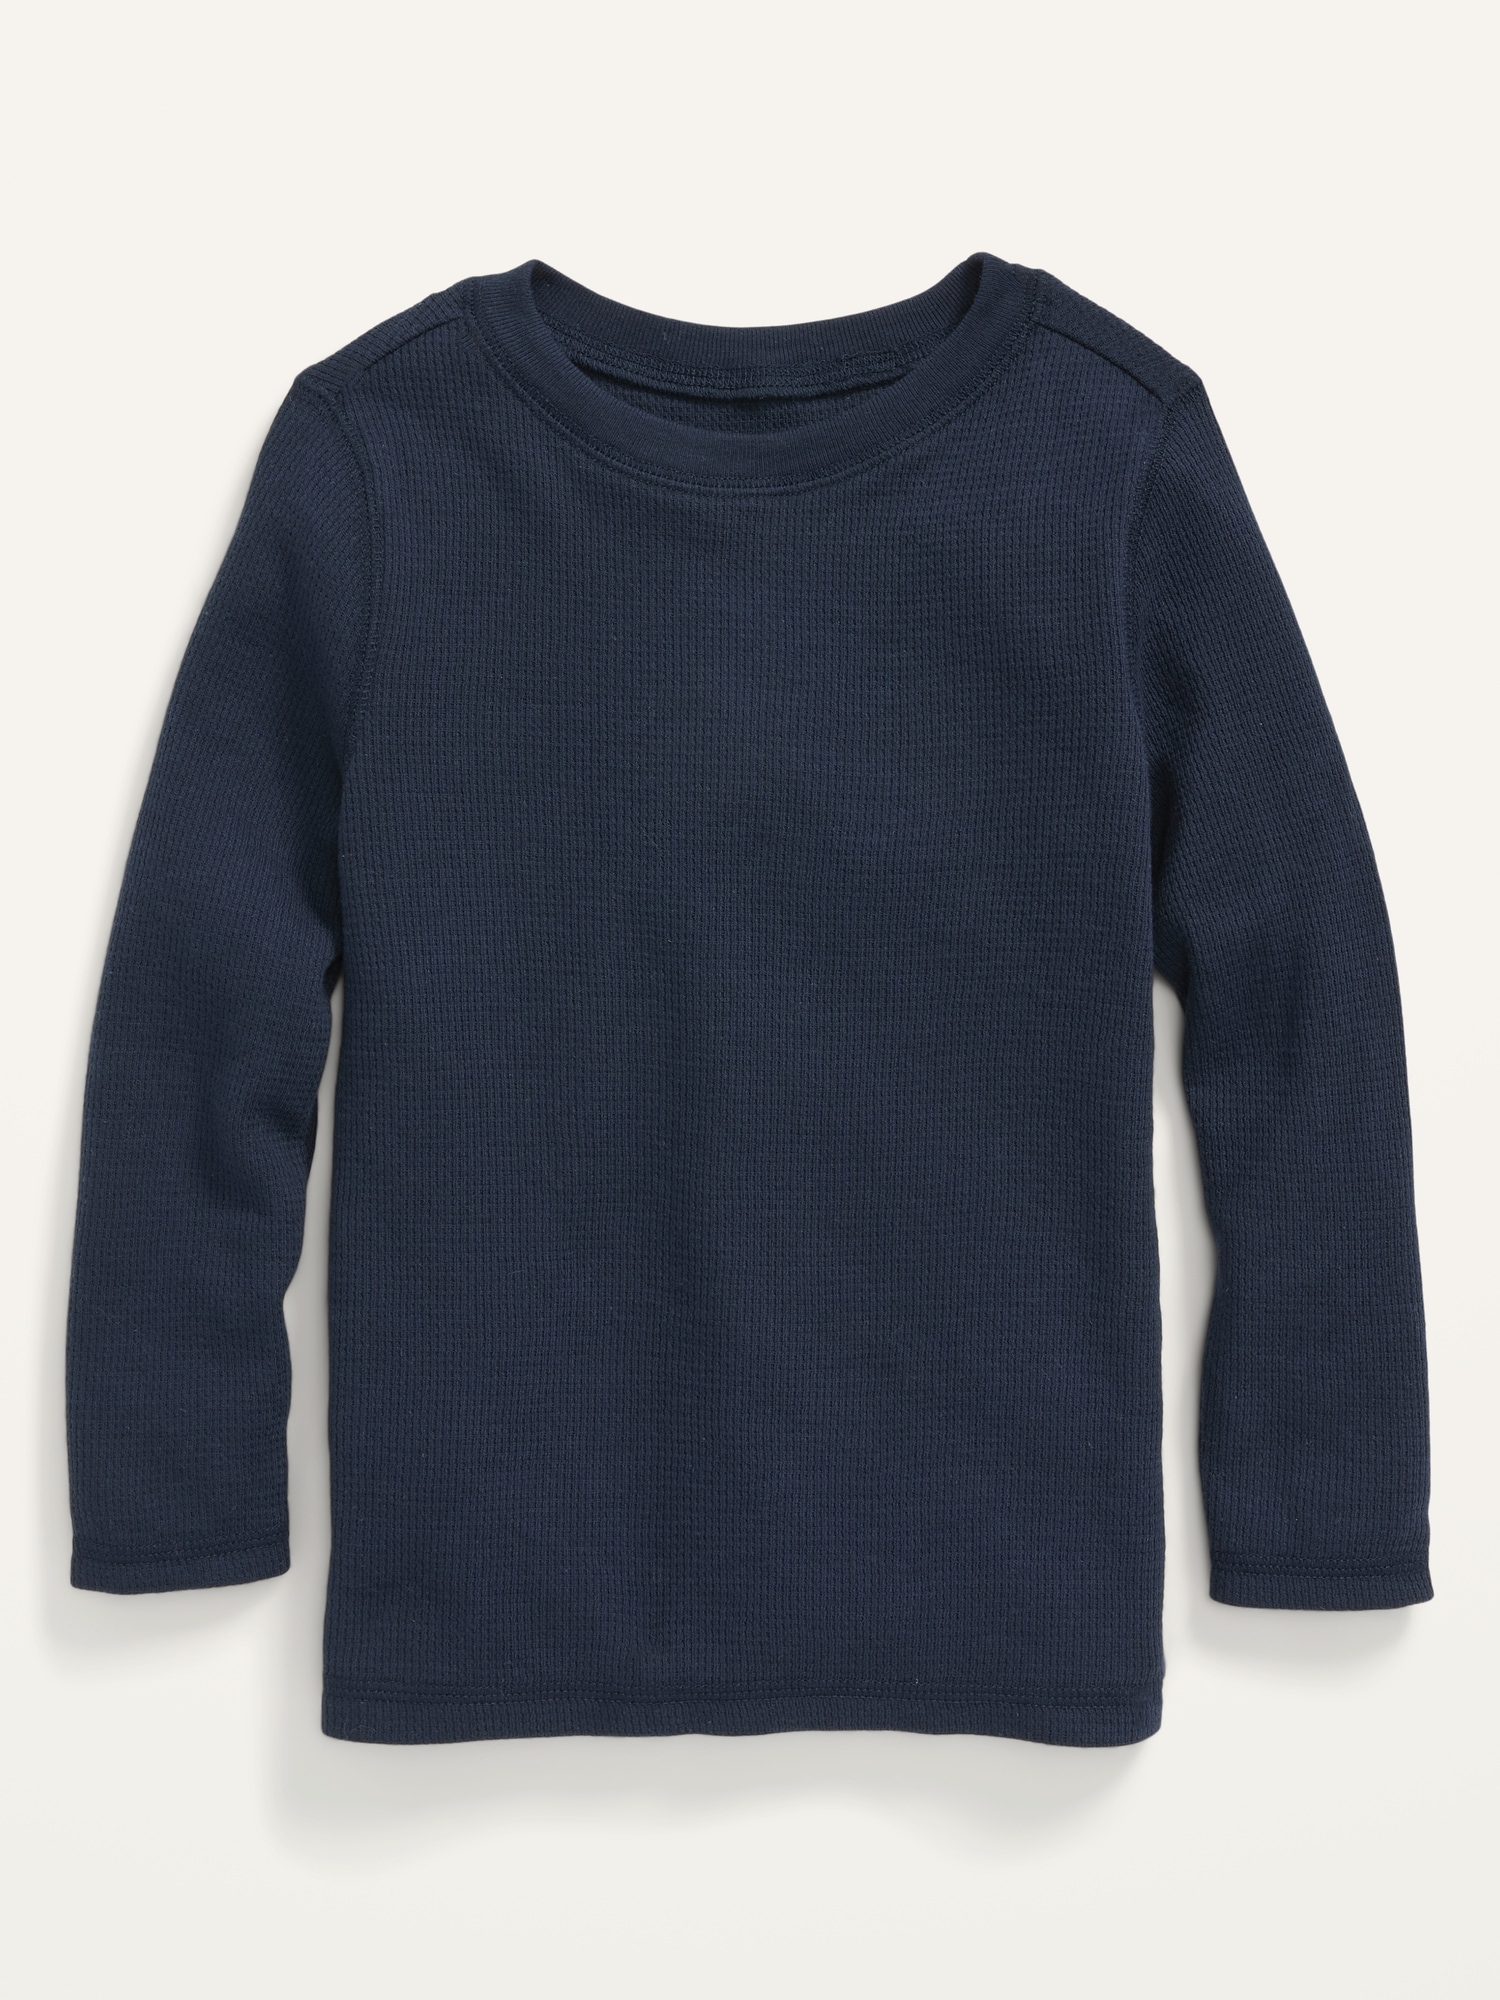 Thermal-Knit Unisex Long-Sleeve T-Shirt for Toddlers | Old Navy